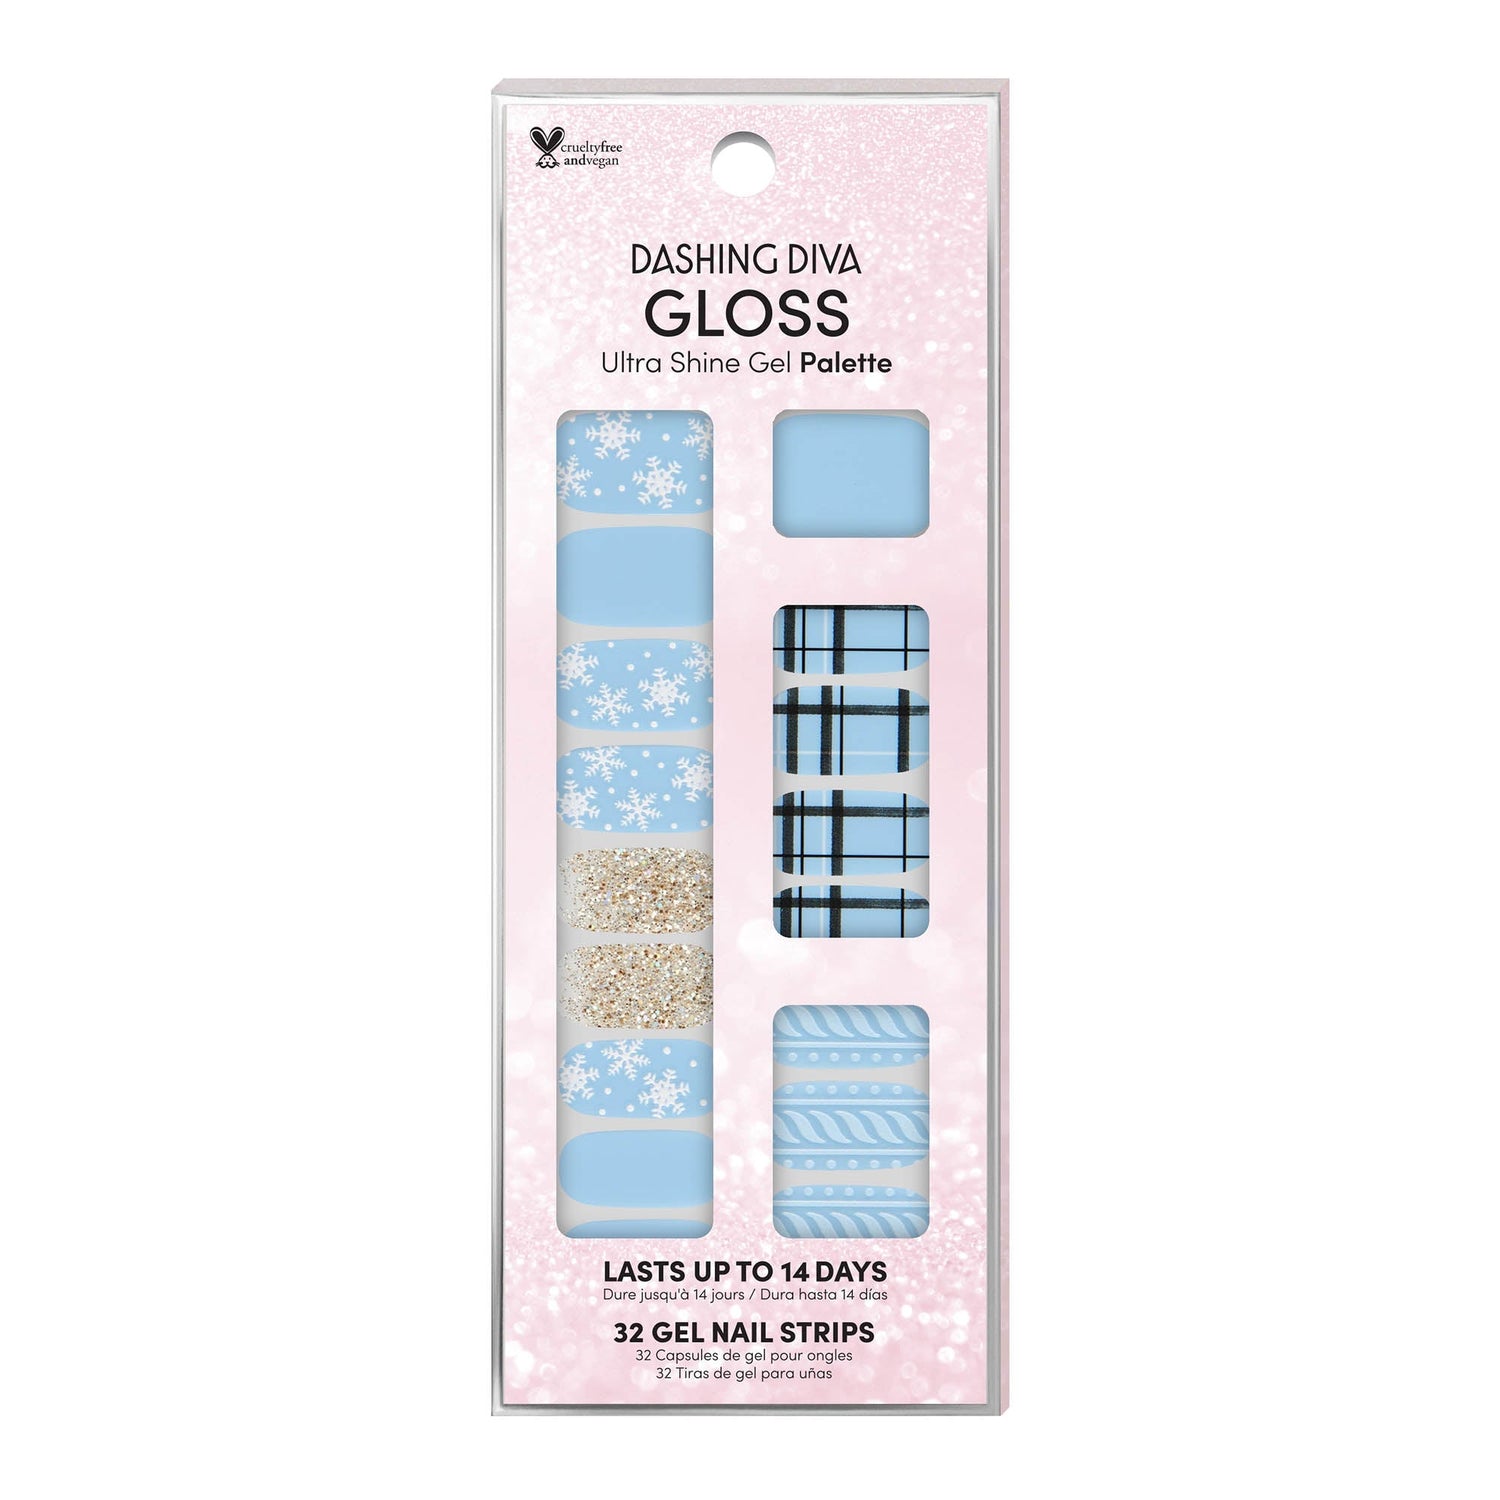 Dashing Diva GLOSS Palette baby blue gel nail strips with snowflakes, plaid, sweater print, and gold glitter accents.